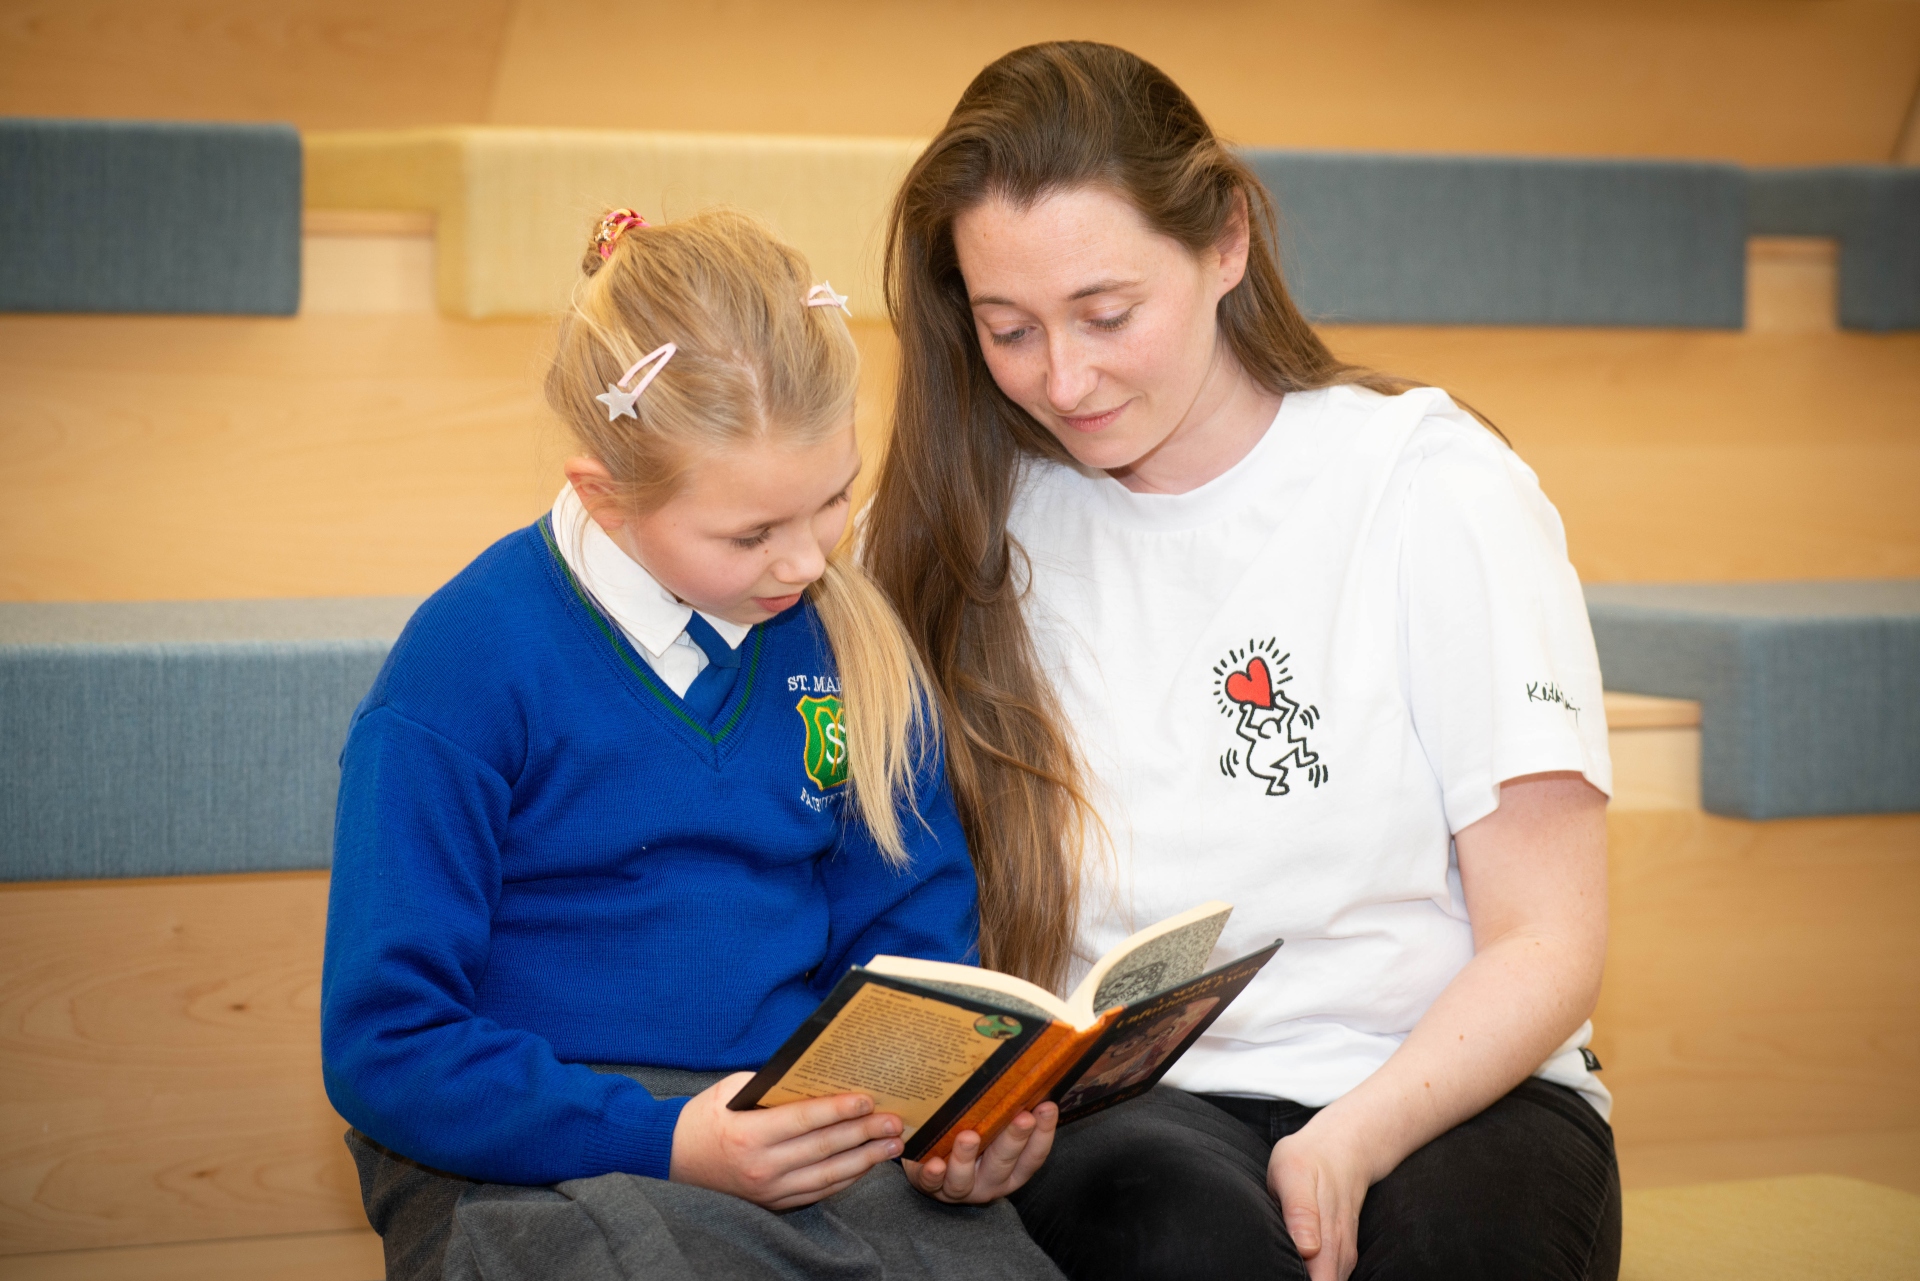 Child with blonde hair and blue school jumper sitting beside a lady with long brown hair and white t-shirt with both looking into a book